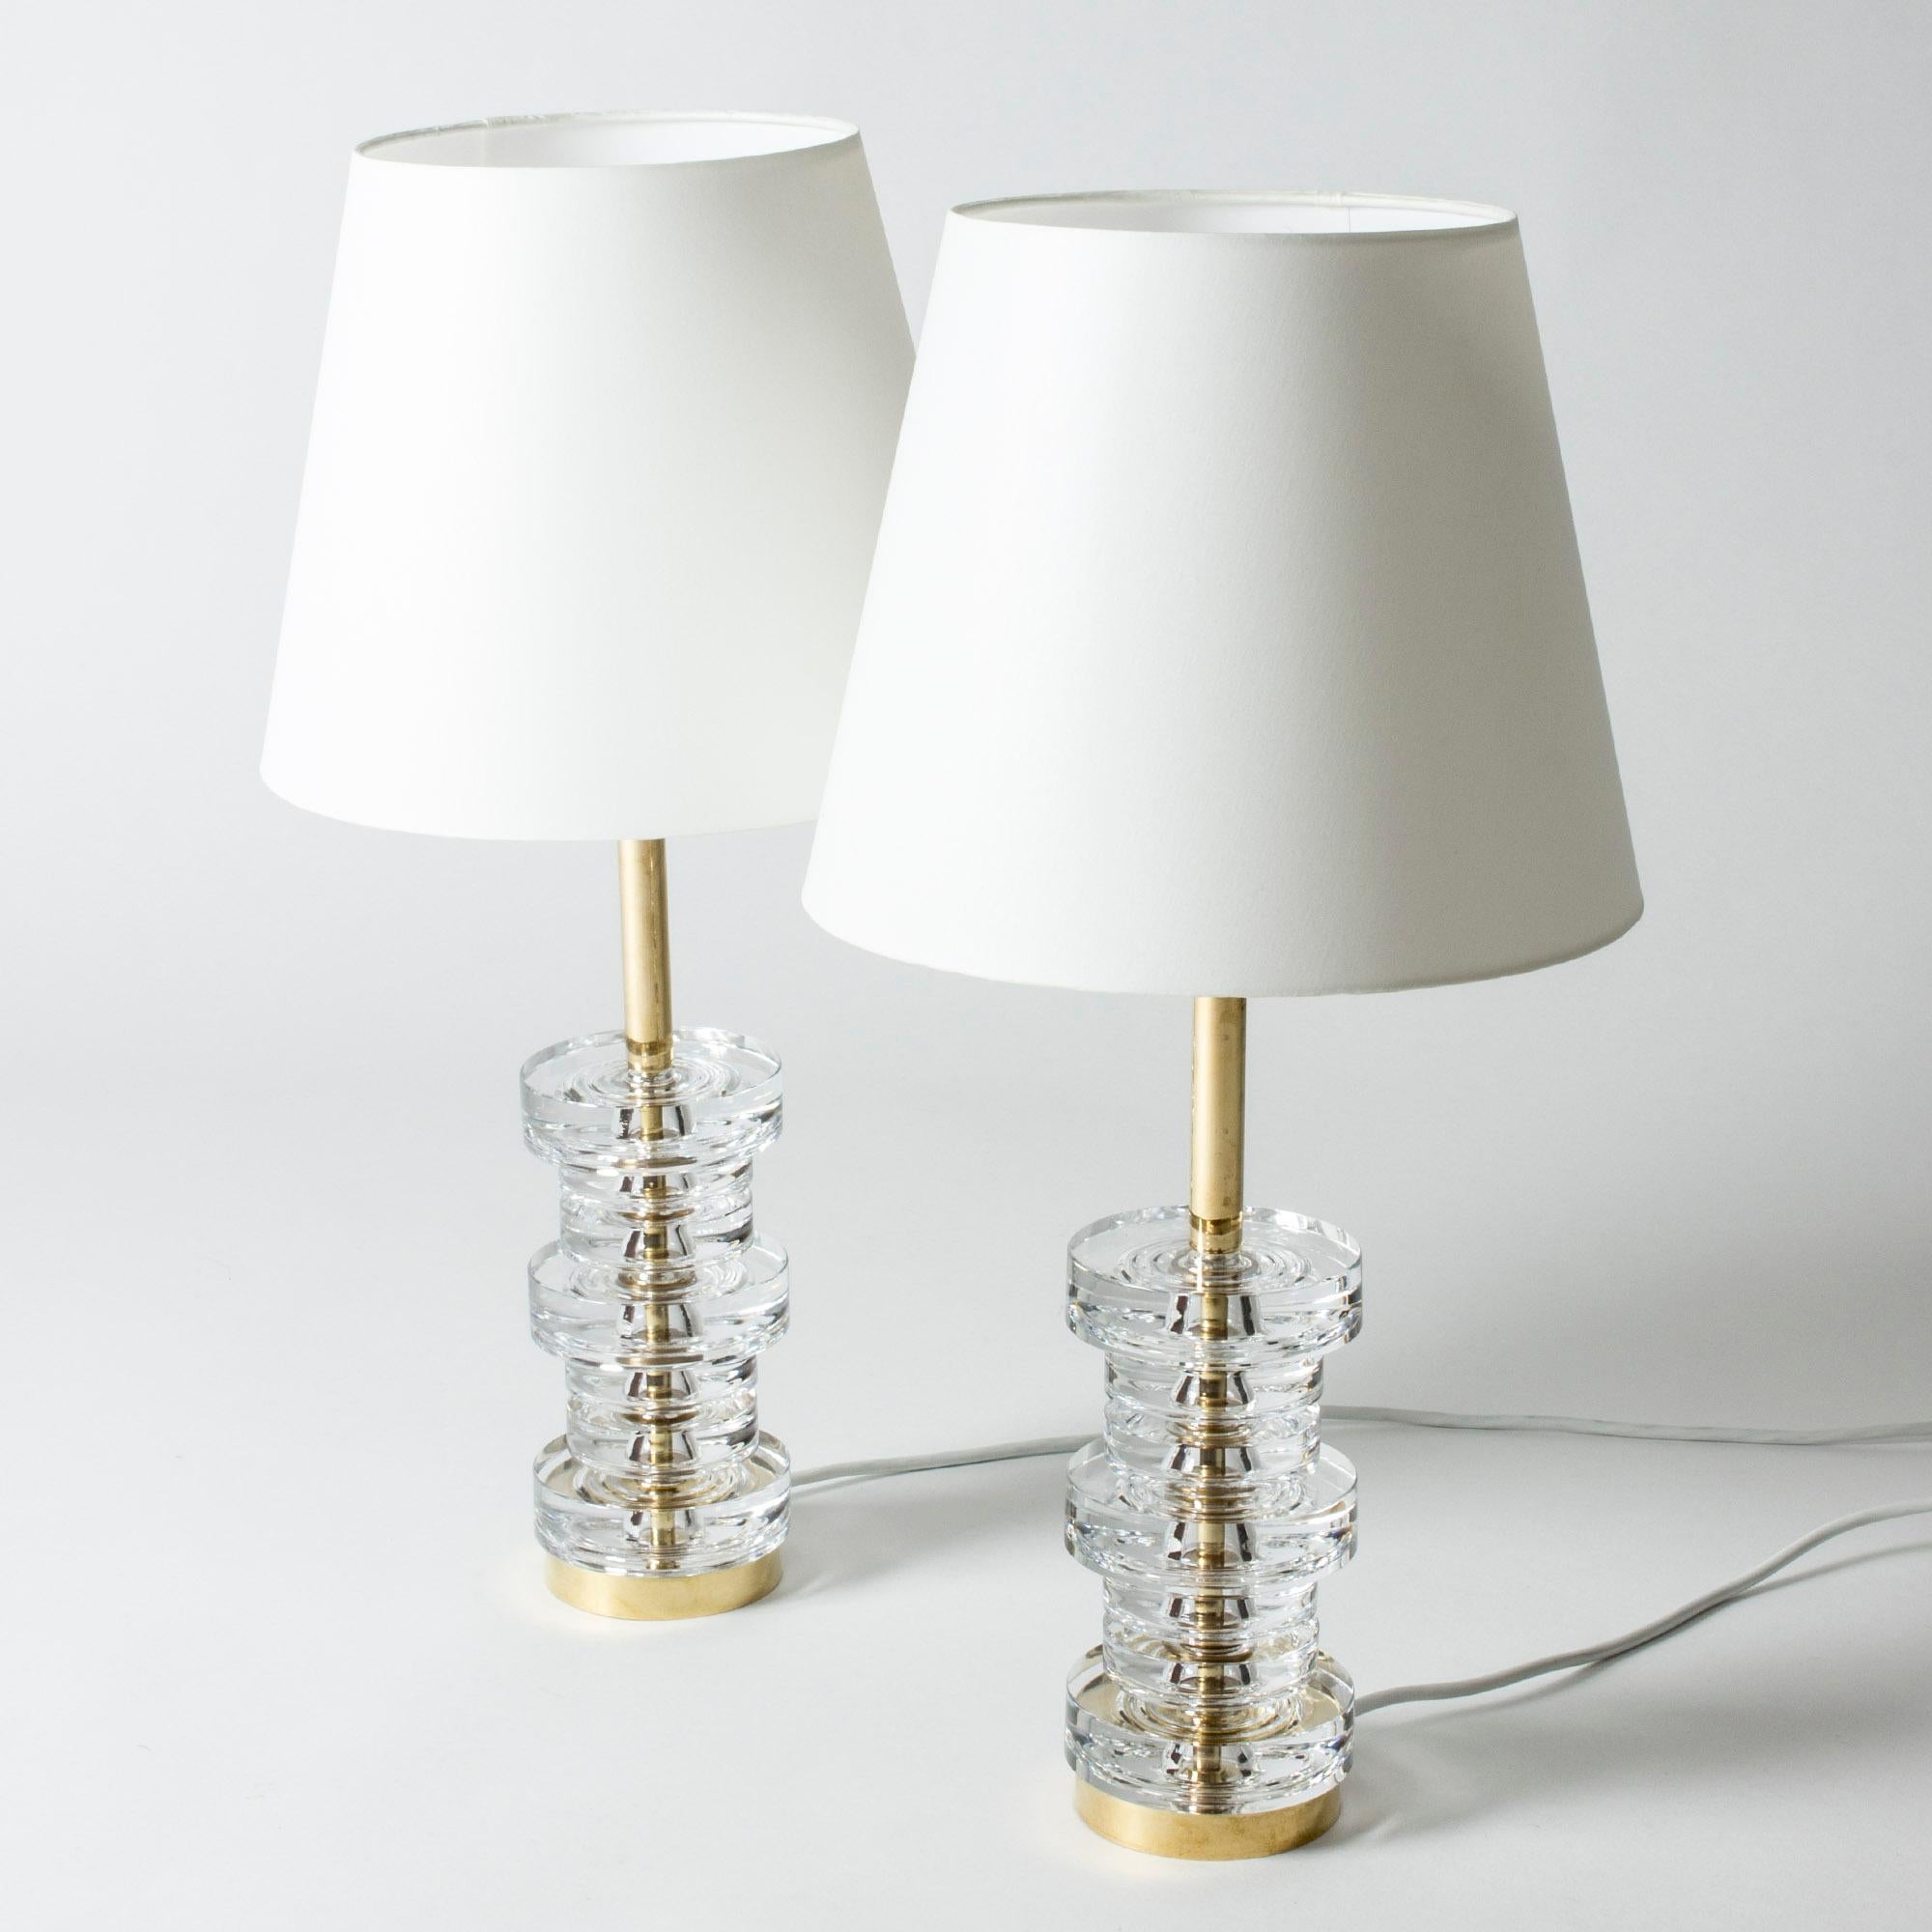 Mid-Century Modern Pair of Glass and Brass Table Lamps by Carl Fagerlund for Orrefors, Sweden